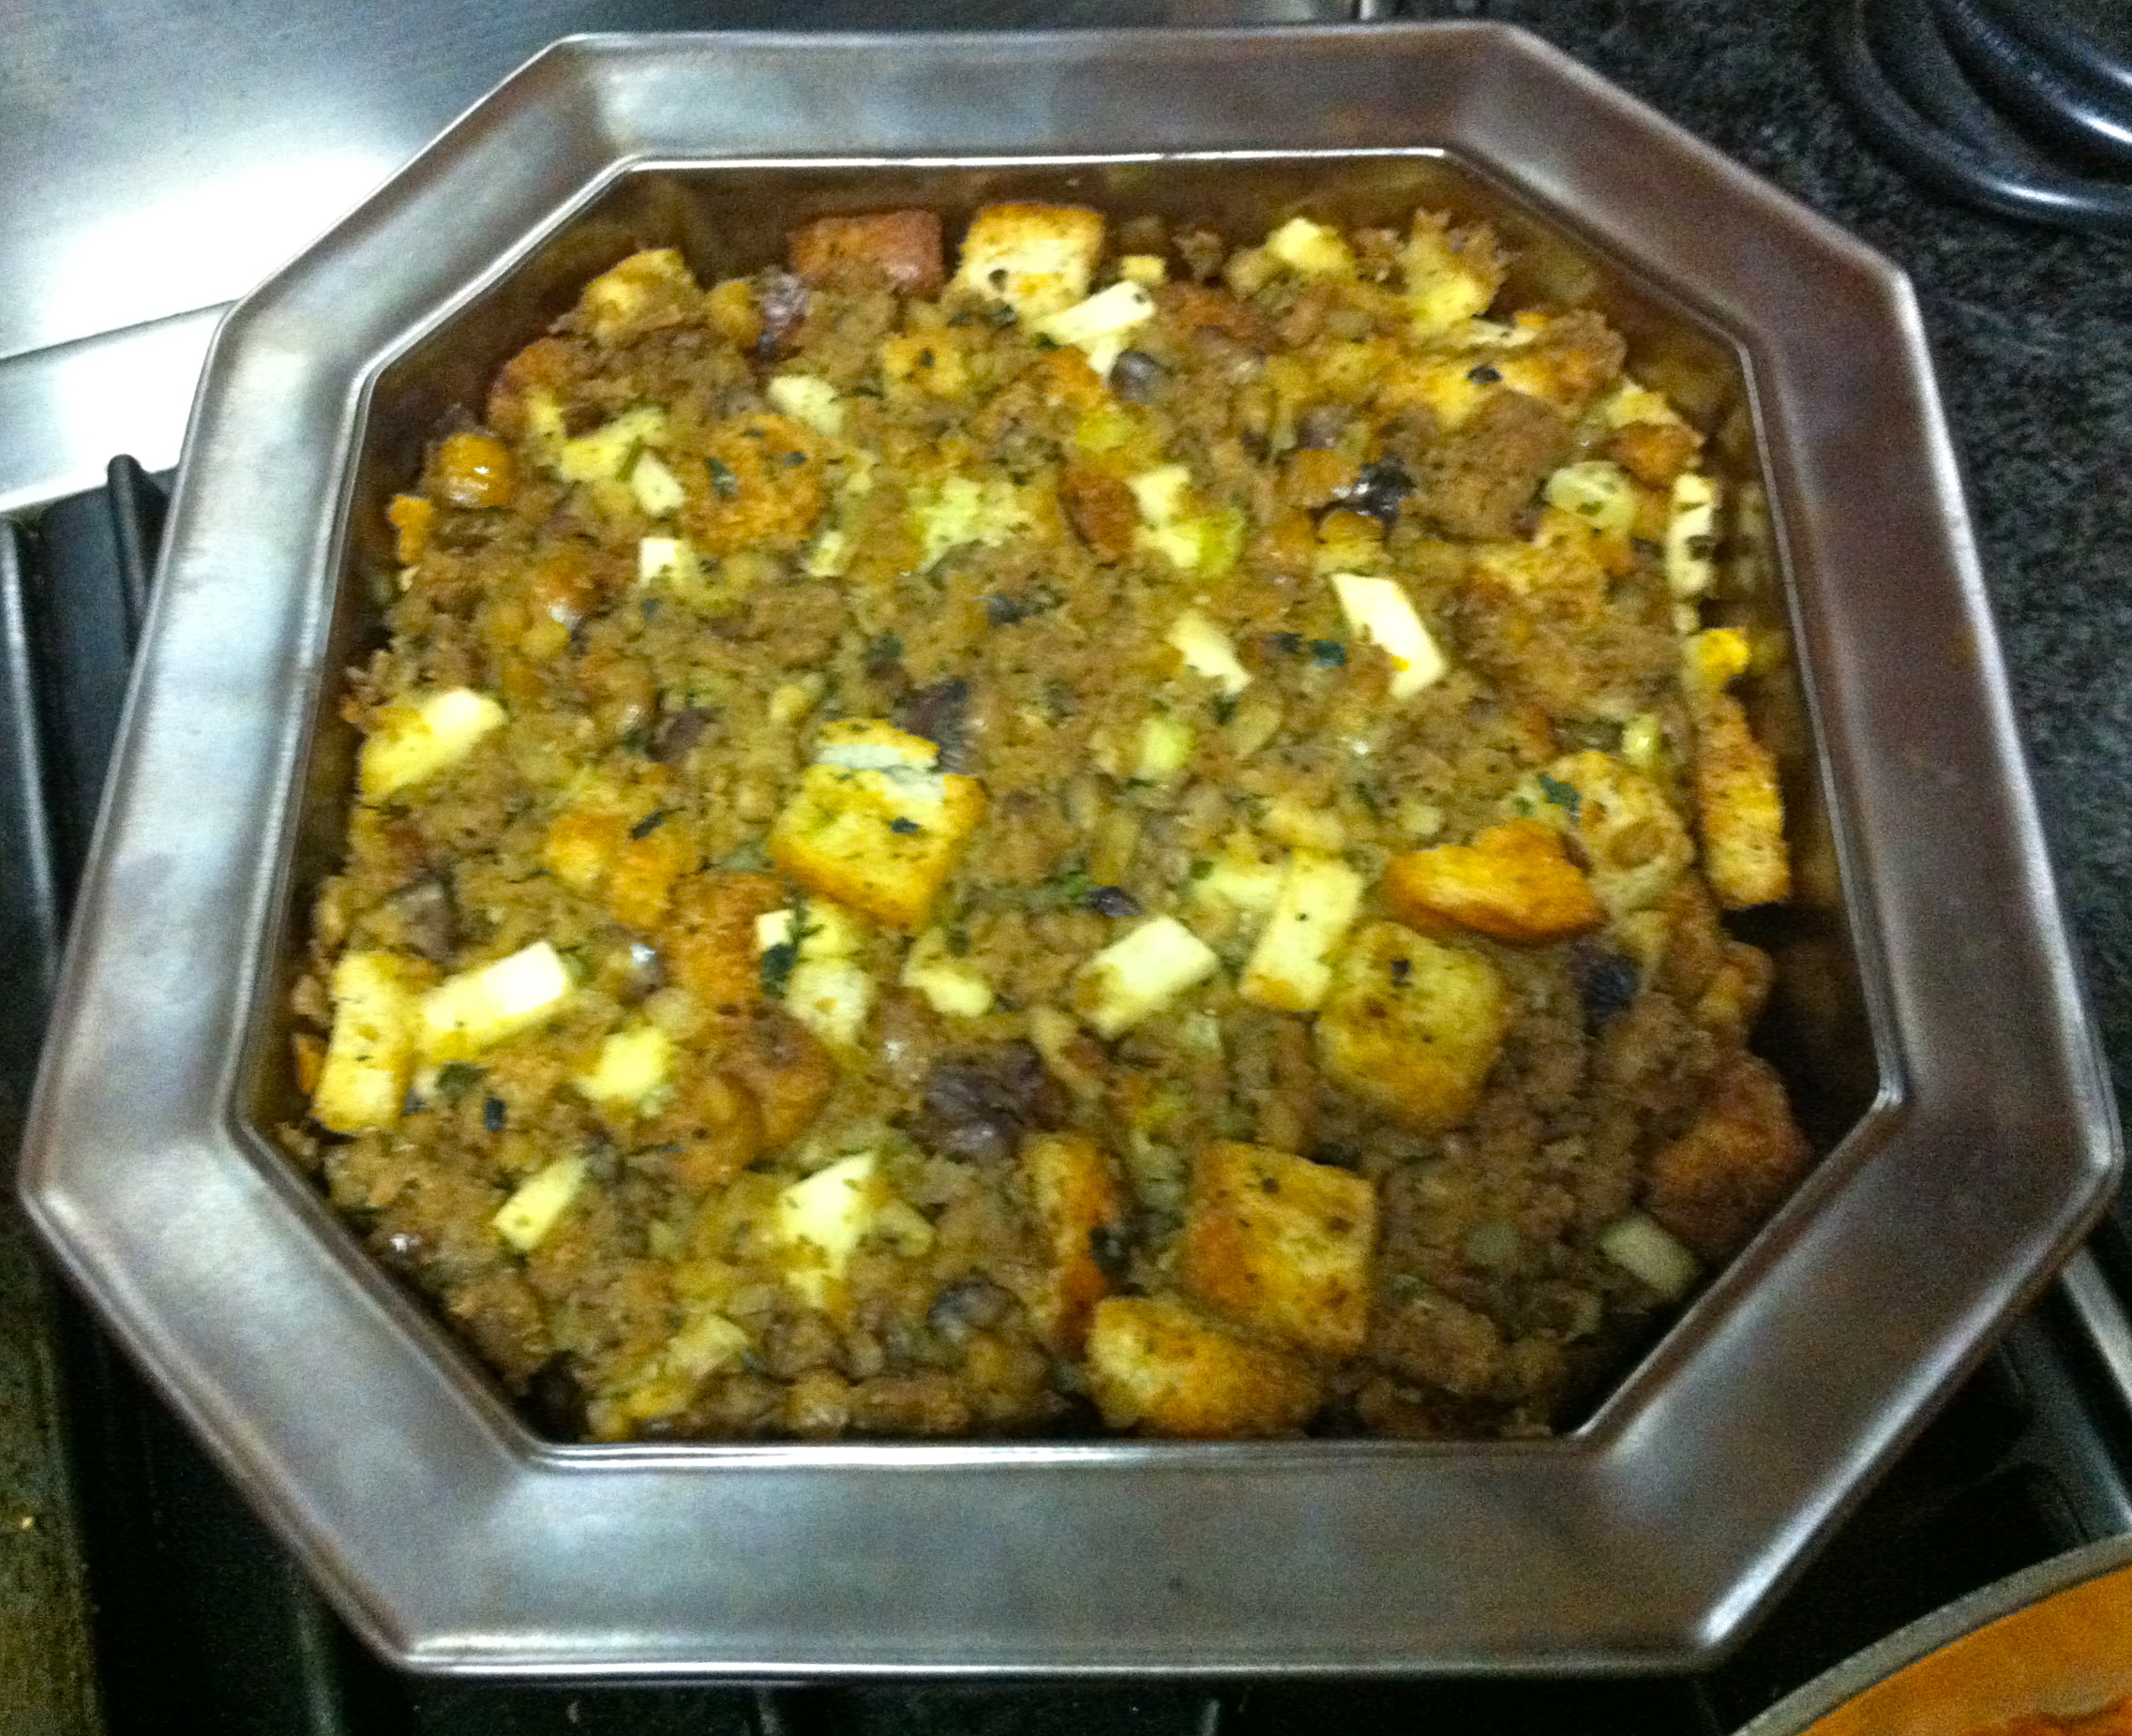 This vegan stuffing is amazingly delicious with Field Roast sausage and apples.